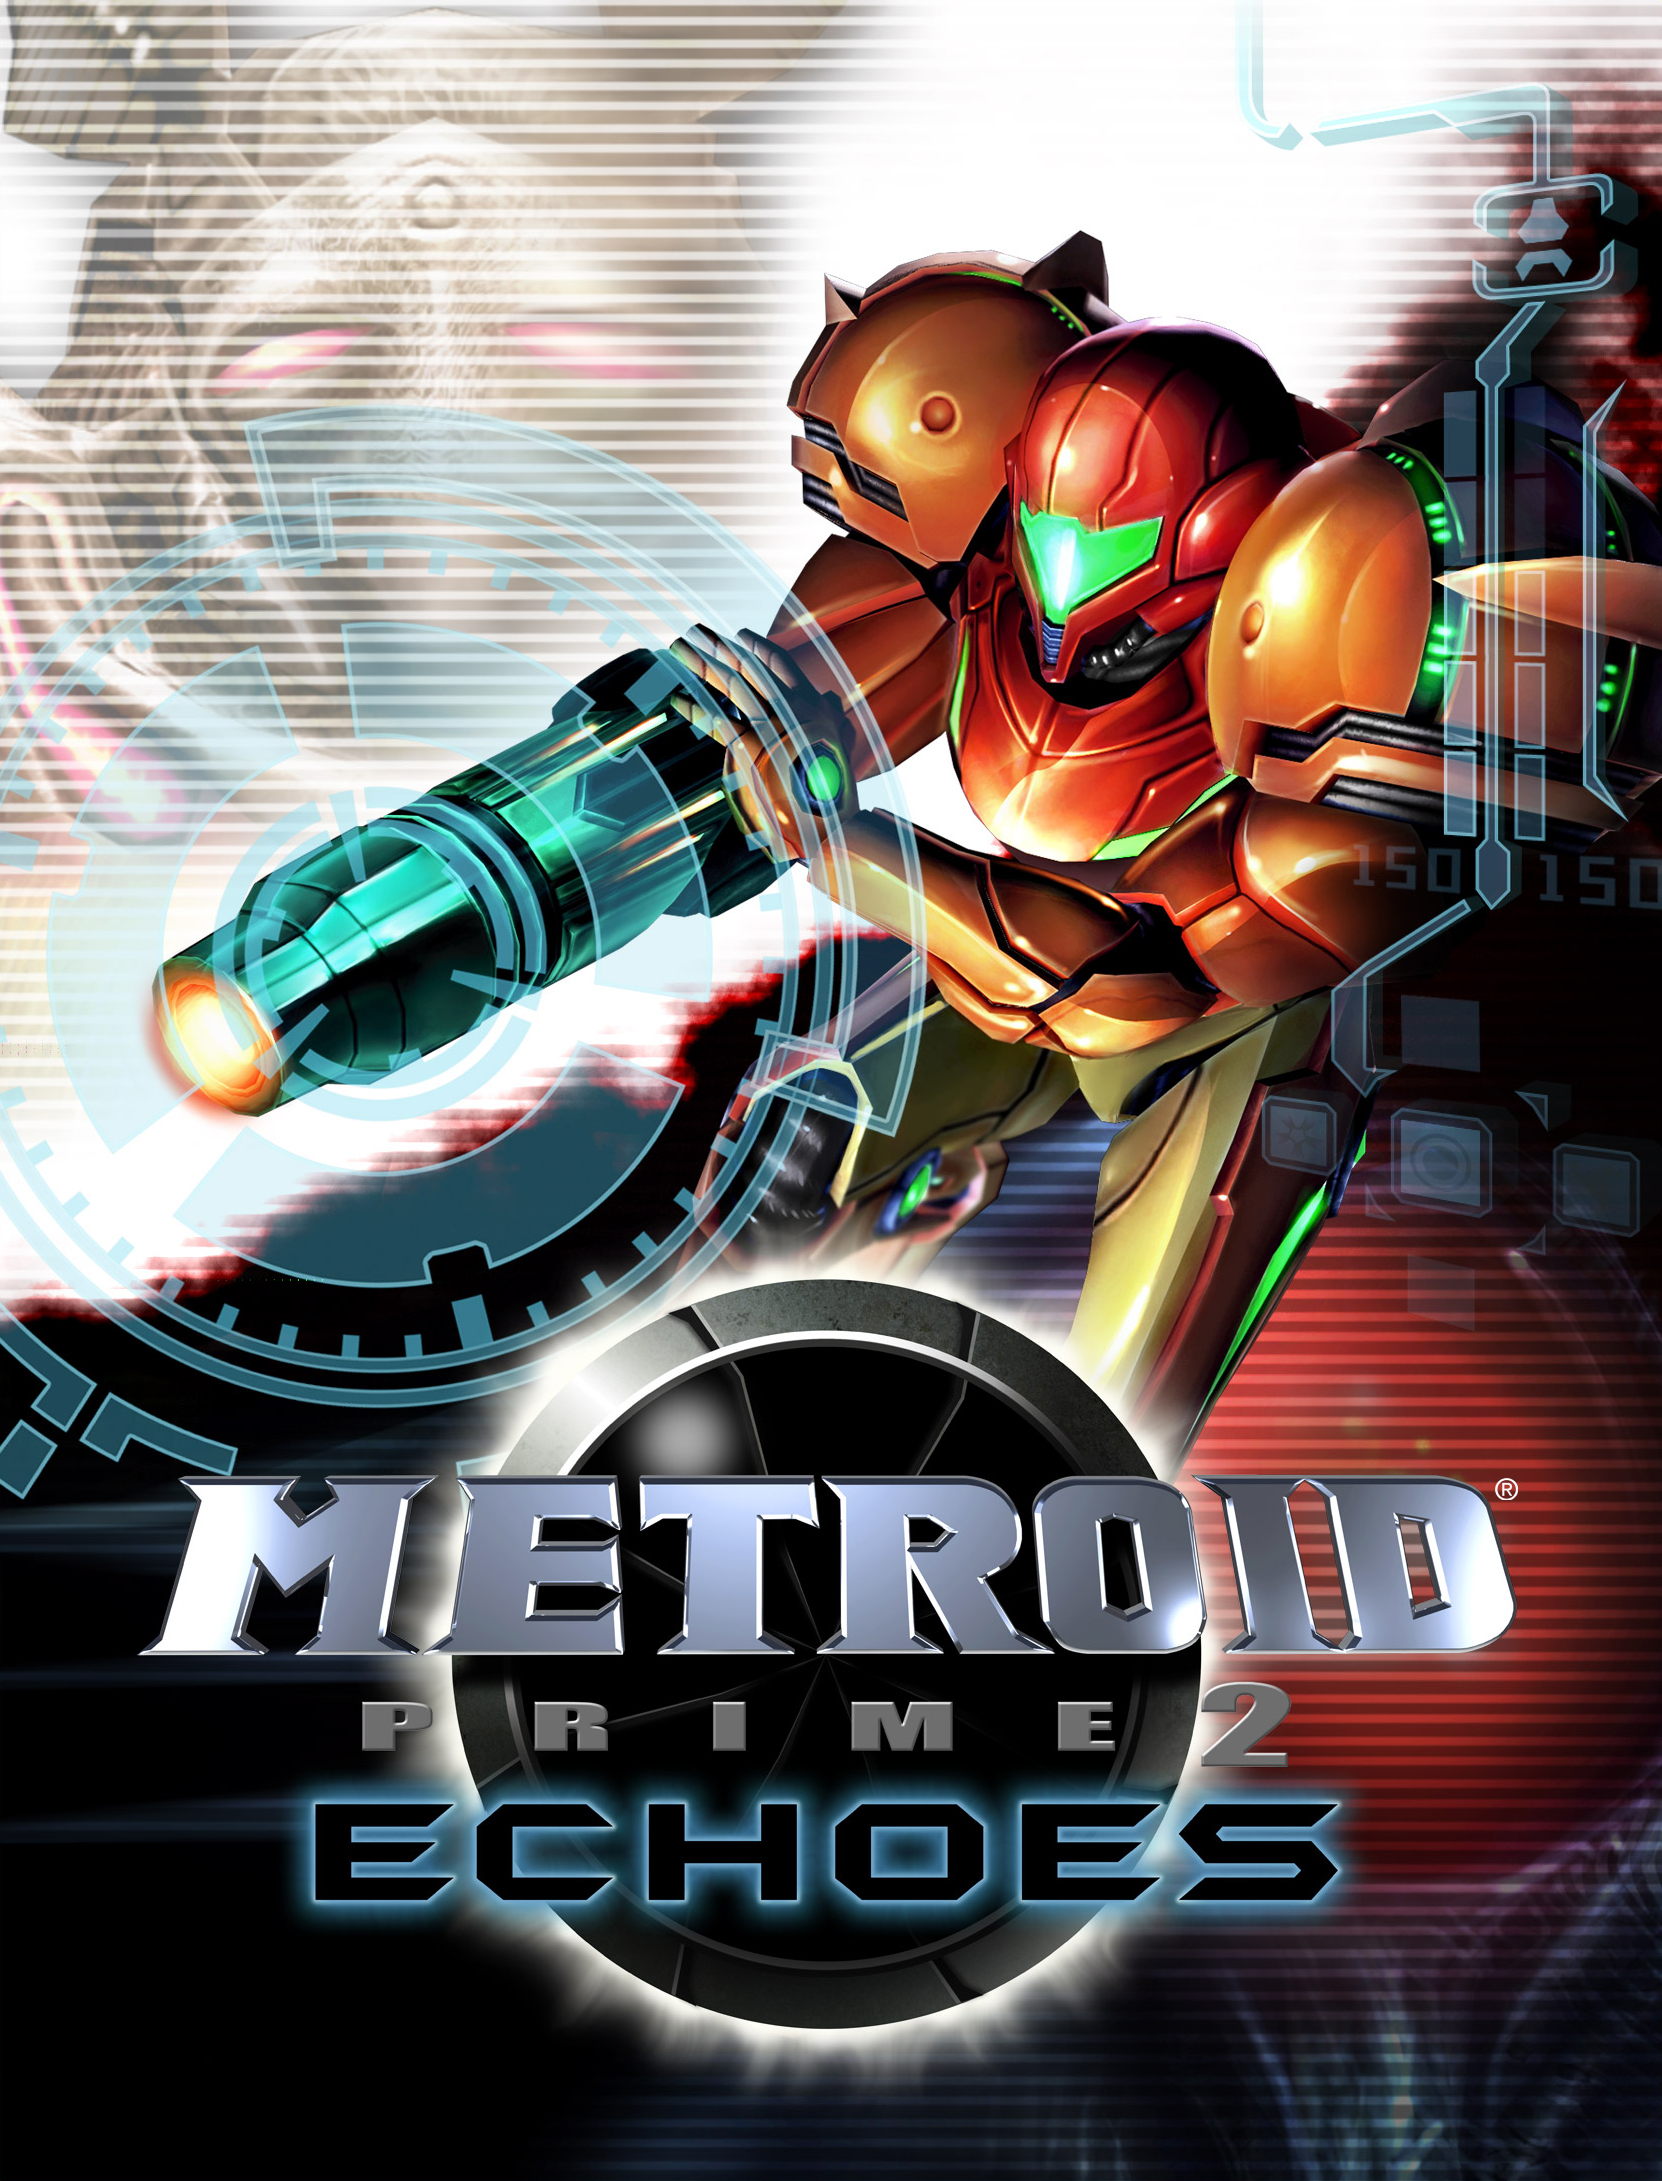 Metroid Prime 2: Echoes Video Game Box Art - ID: 202109 - Image Abyss.